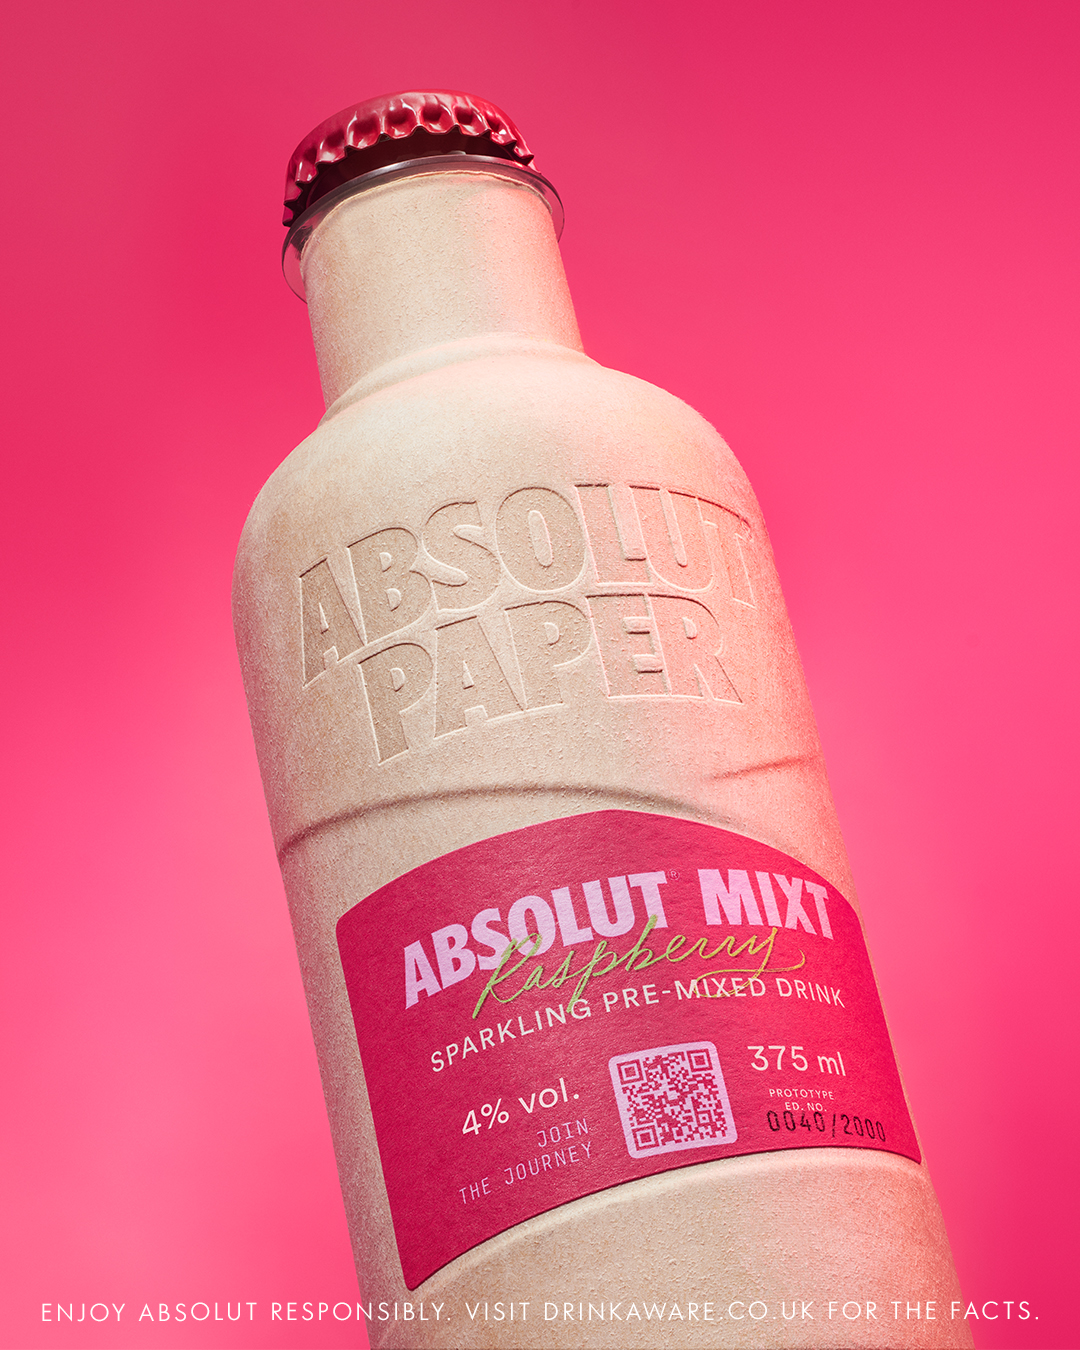 Absolut vodka launches sustainable paper bottle